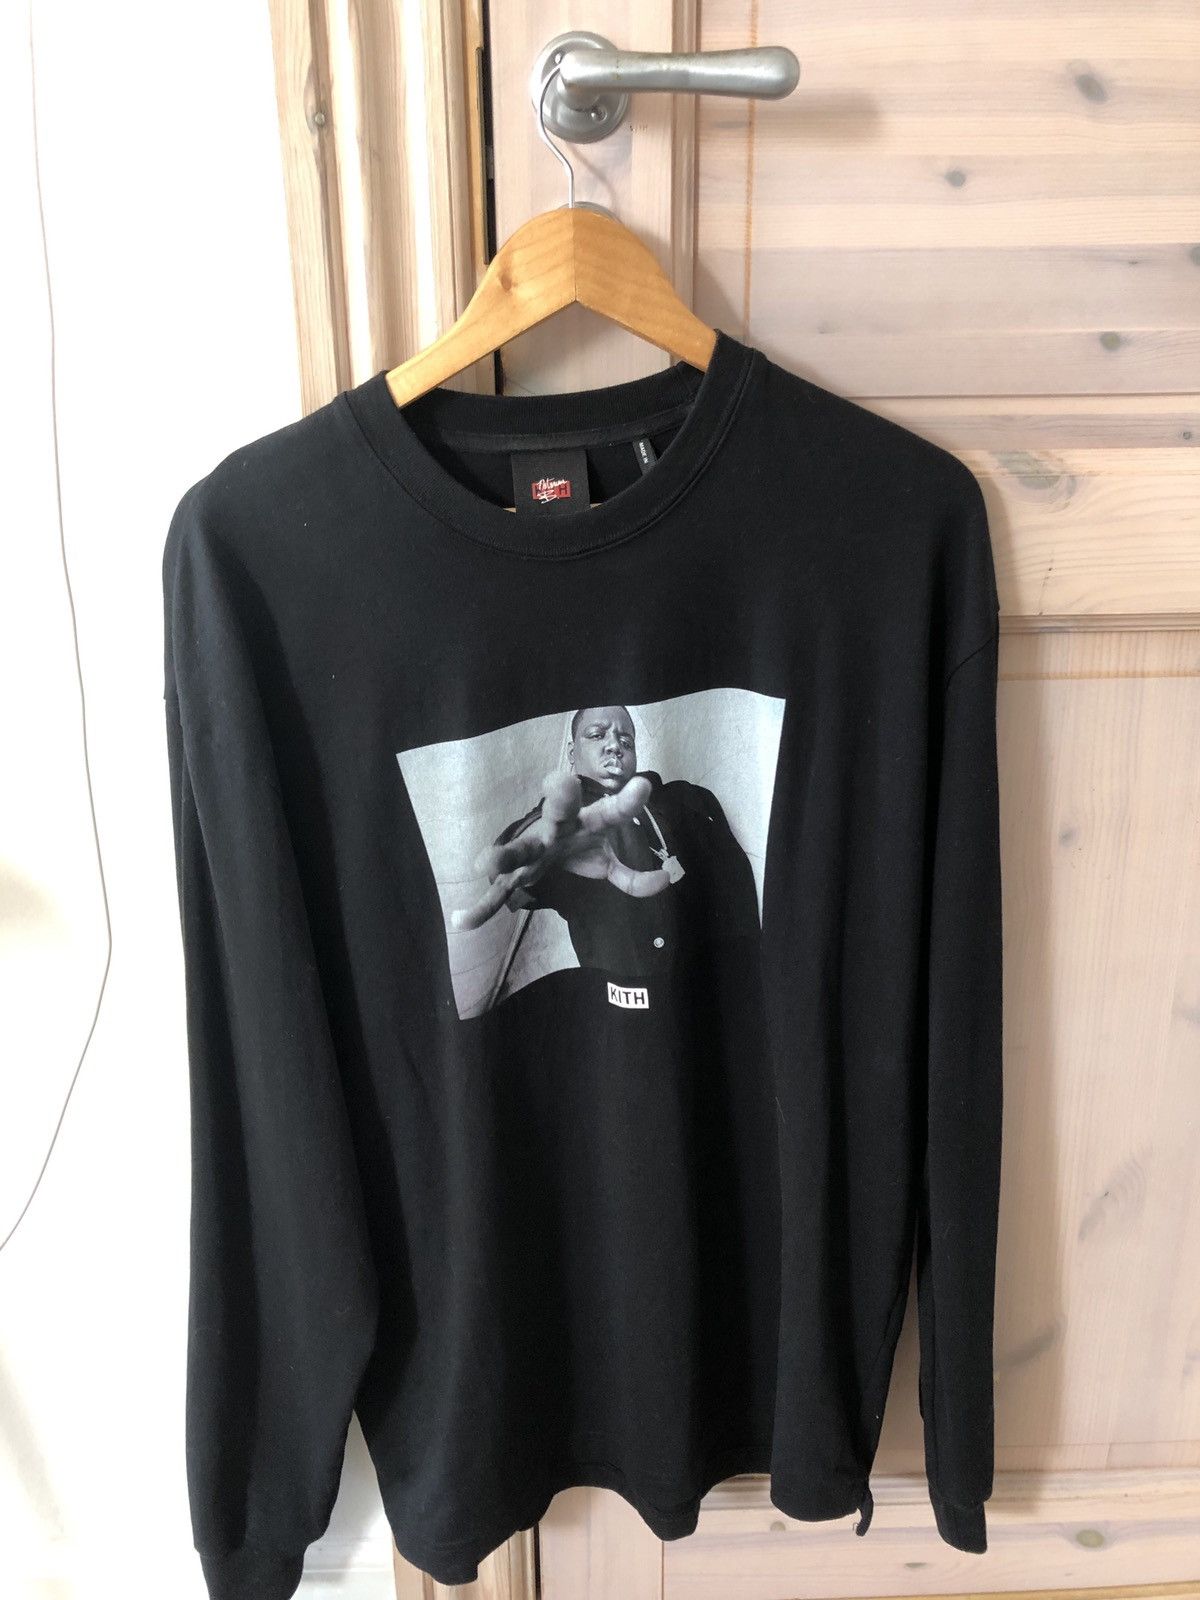 Kith Kith x Biggie - Gimme The Loot L/S Tee Black | Grailed